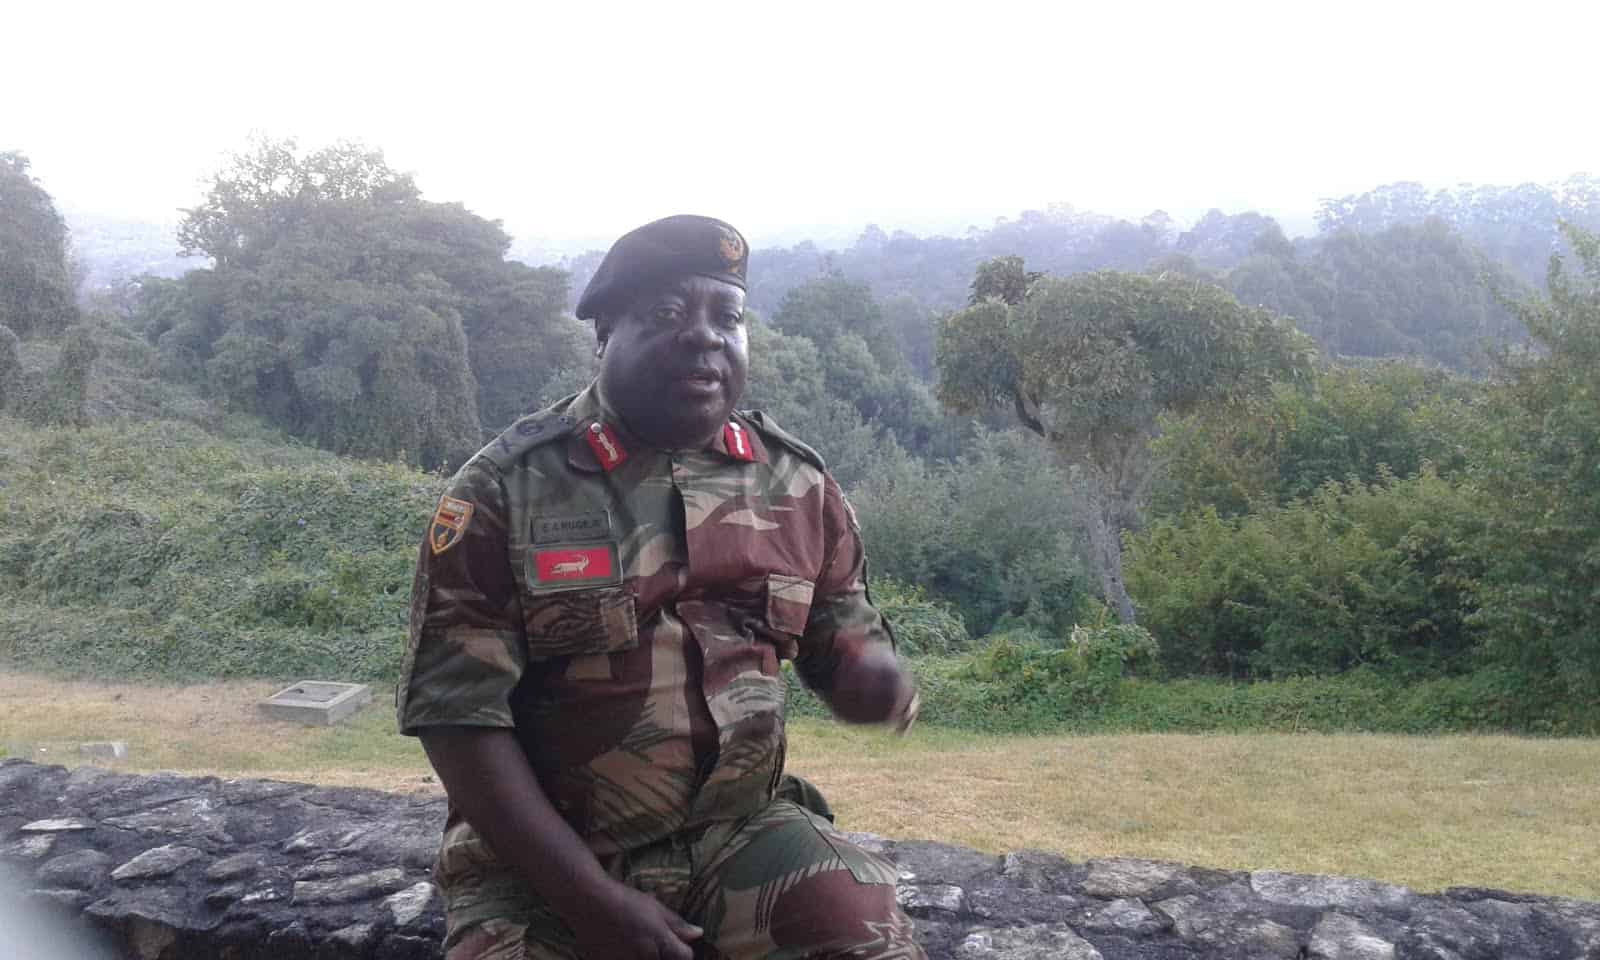 “It was an attempt on Chiwenga ally’s life”: Armed man gunned down by soldiers at Gen Rugeje house